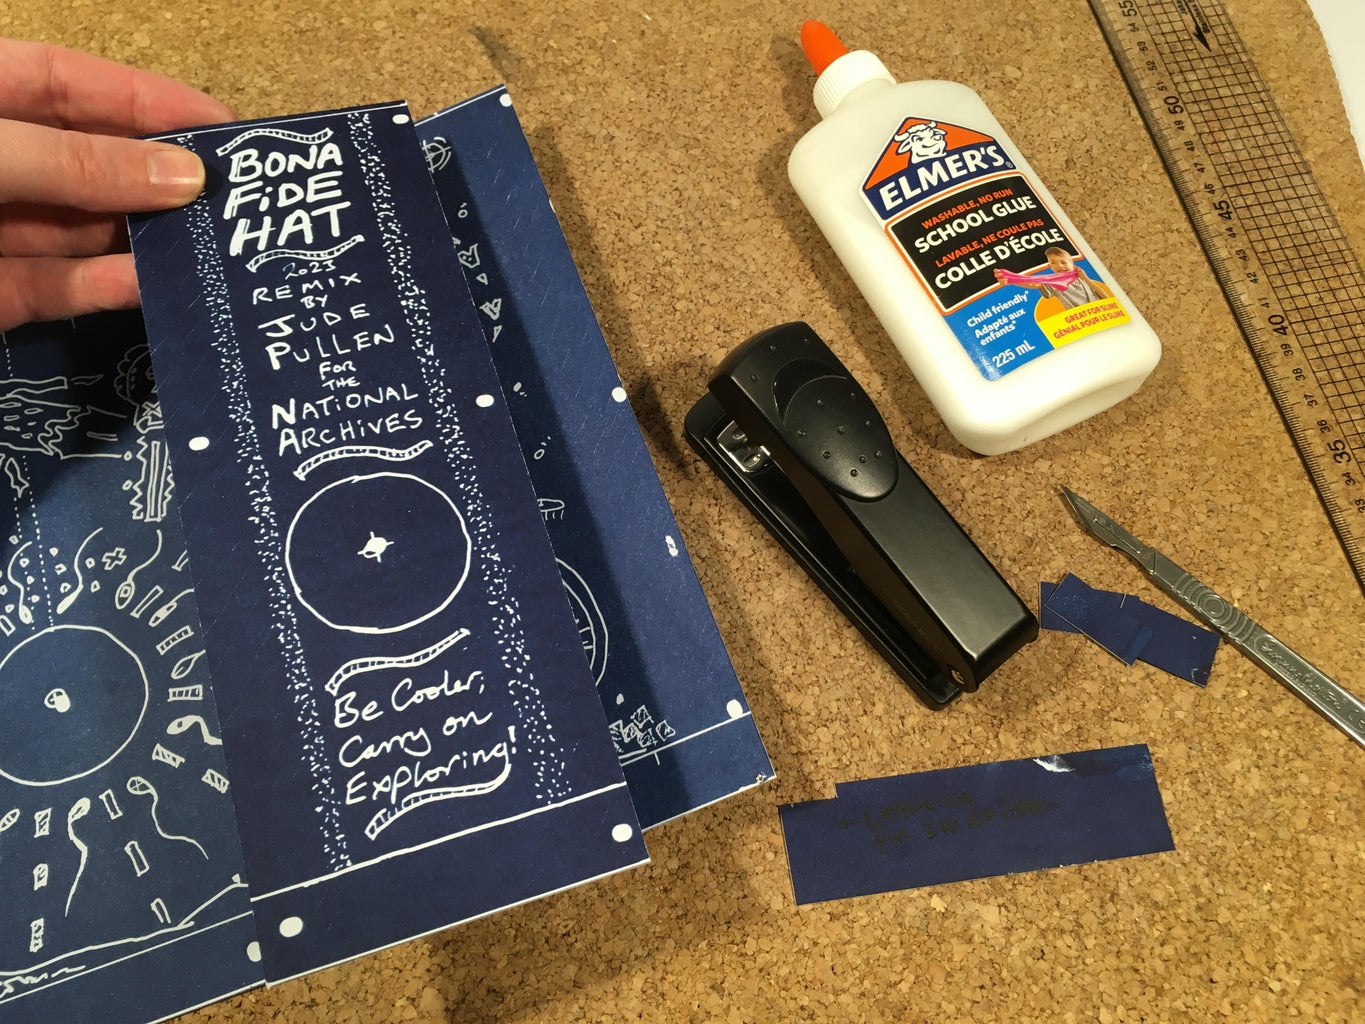 Staples and Glue